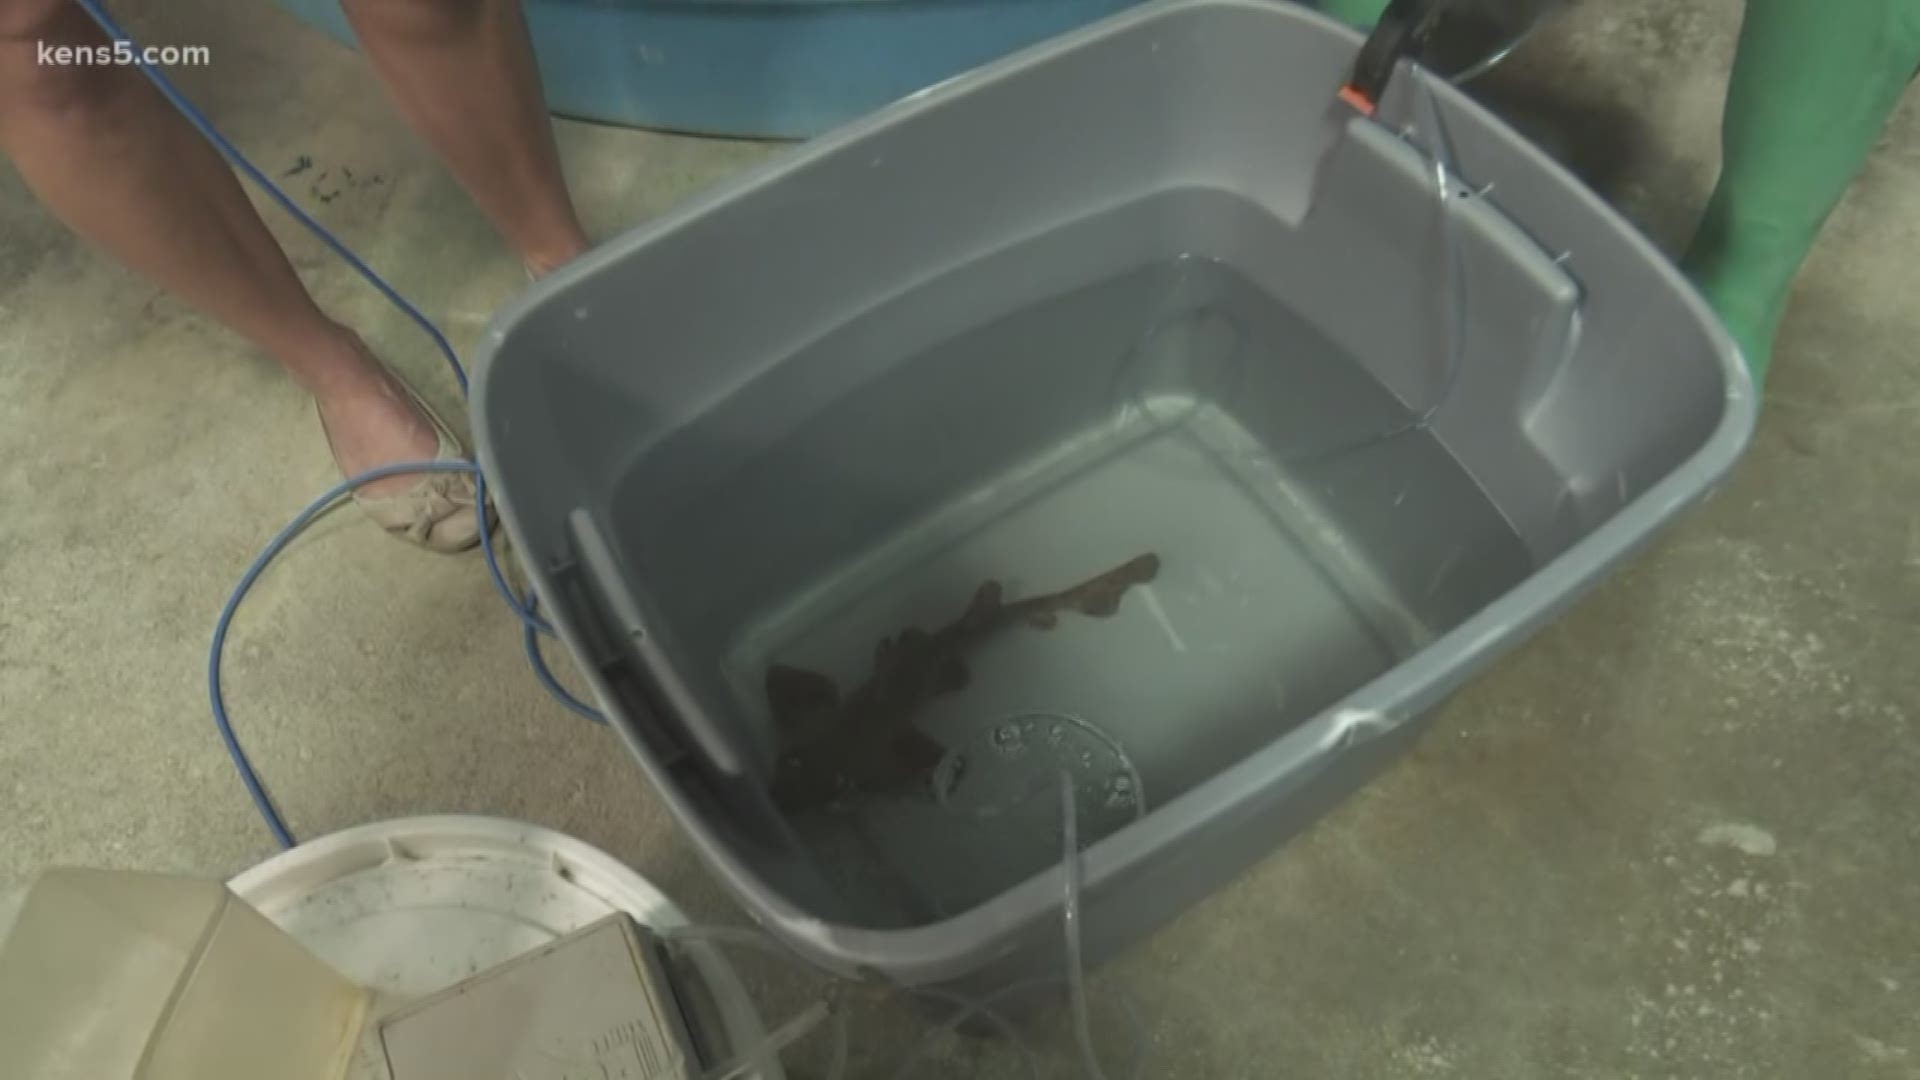 A horn shark stolen from the San Antonio aquarium Saturday is back home in her salt water exhibit. Three people were captured on surveillance stealing the shark from a tank, putting her in a stroller and walking out.